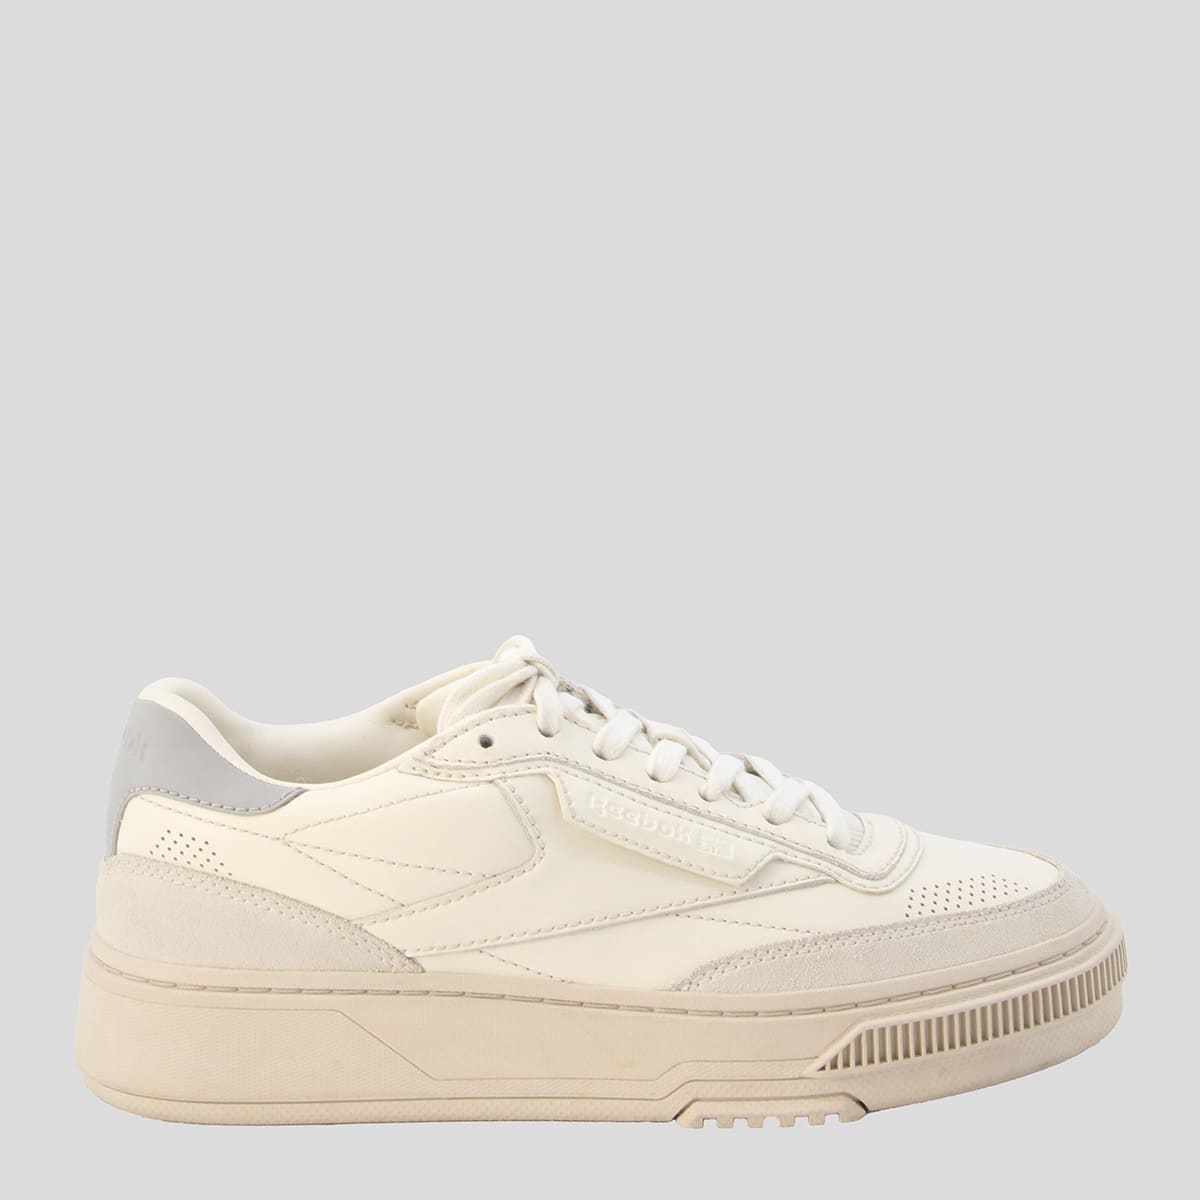 Reebok White And Grey Leather C Ltd Sneakers